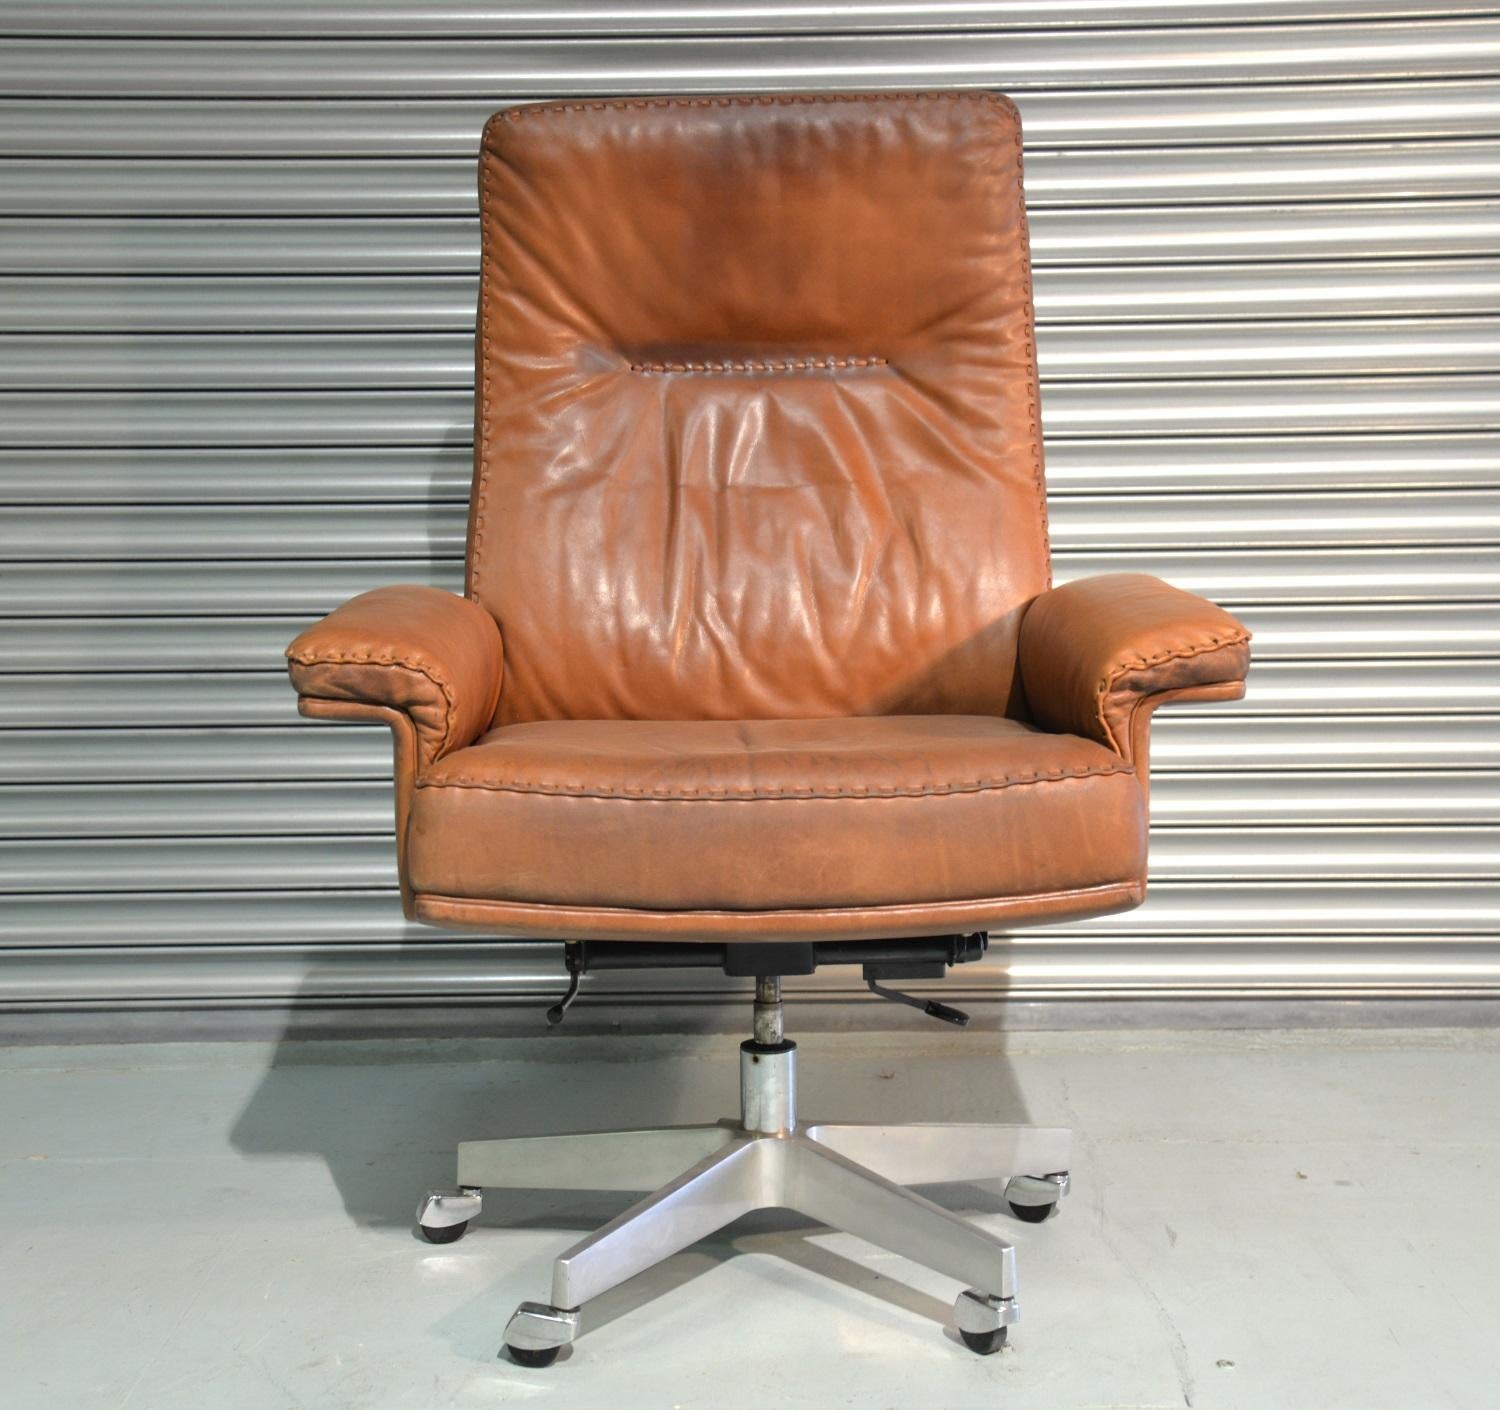 Discounted airfreight for our US and International customers (from 2 weeks door to door)

We are delighted to bring to you a extremely rare vintage De Sede DS 35 Executive armchair on casters. Hand built to incredibly high standards by De Sede